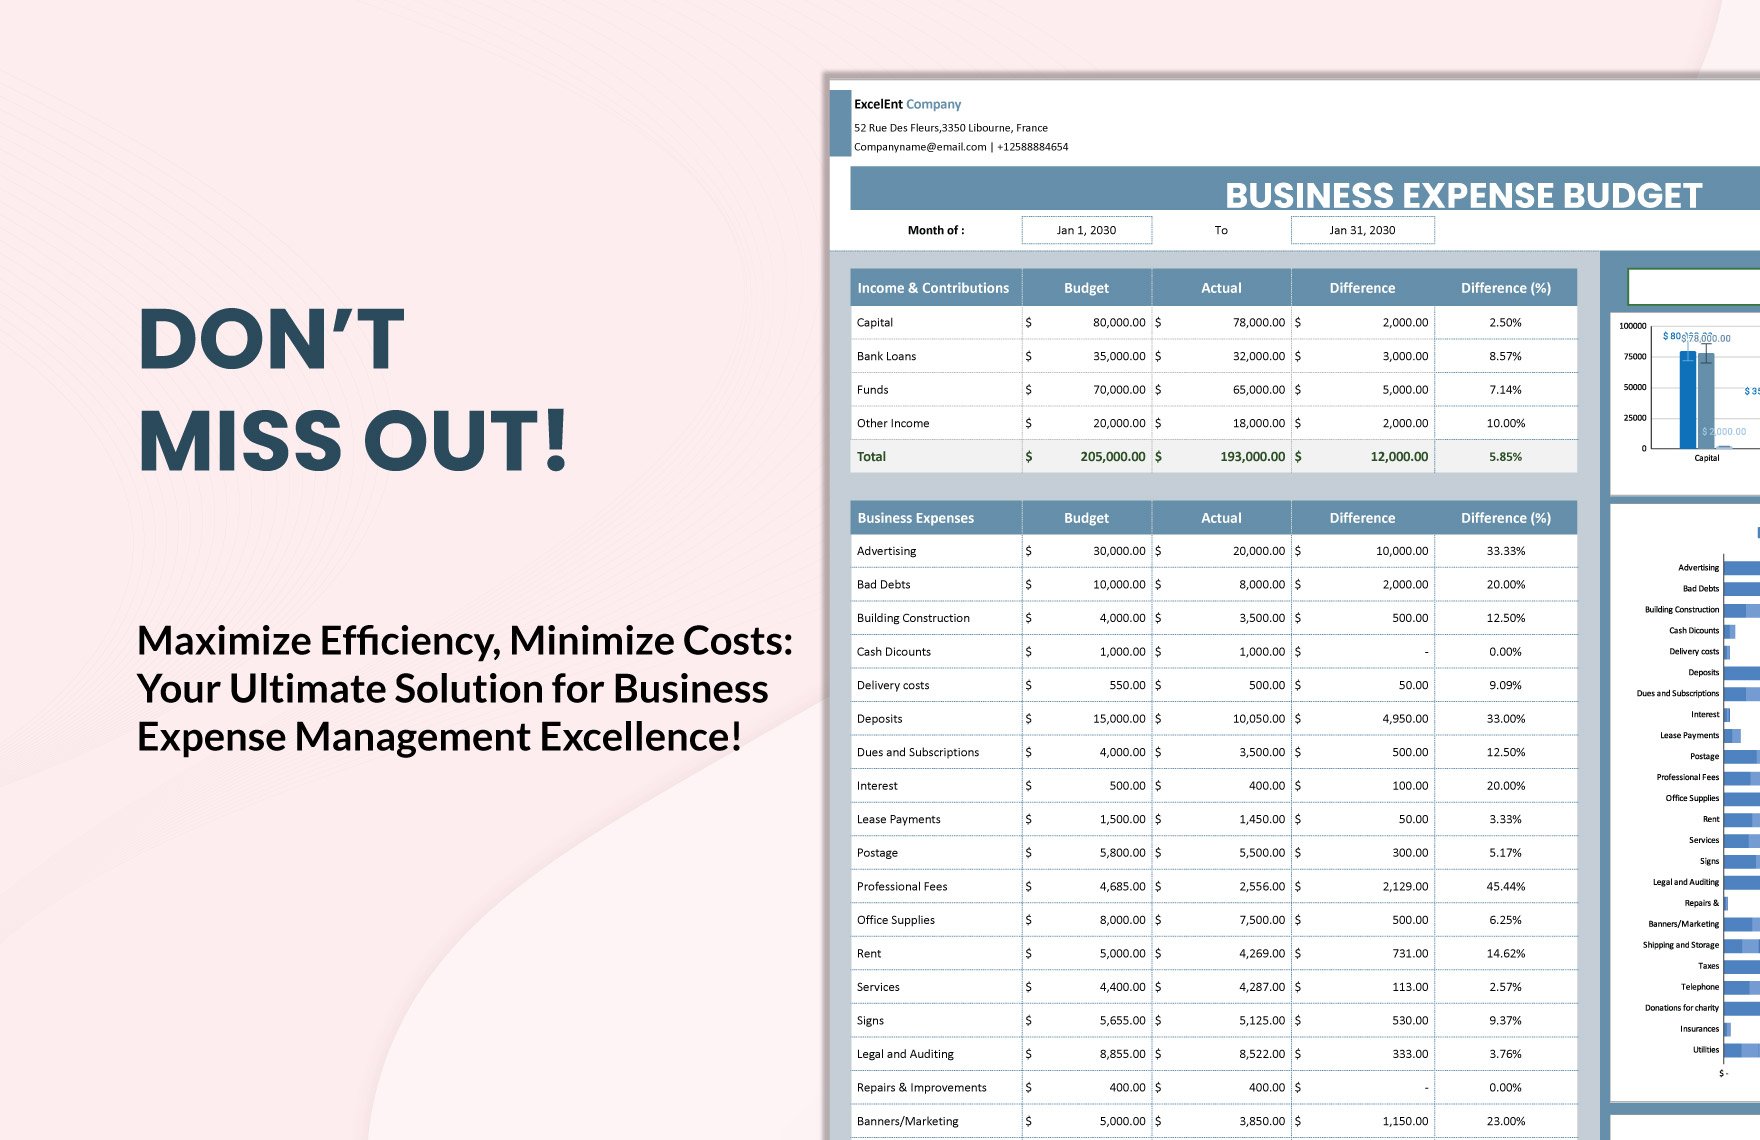 Business Expense Budget Template